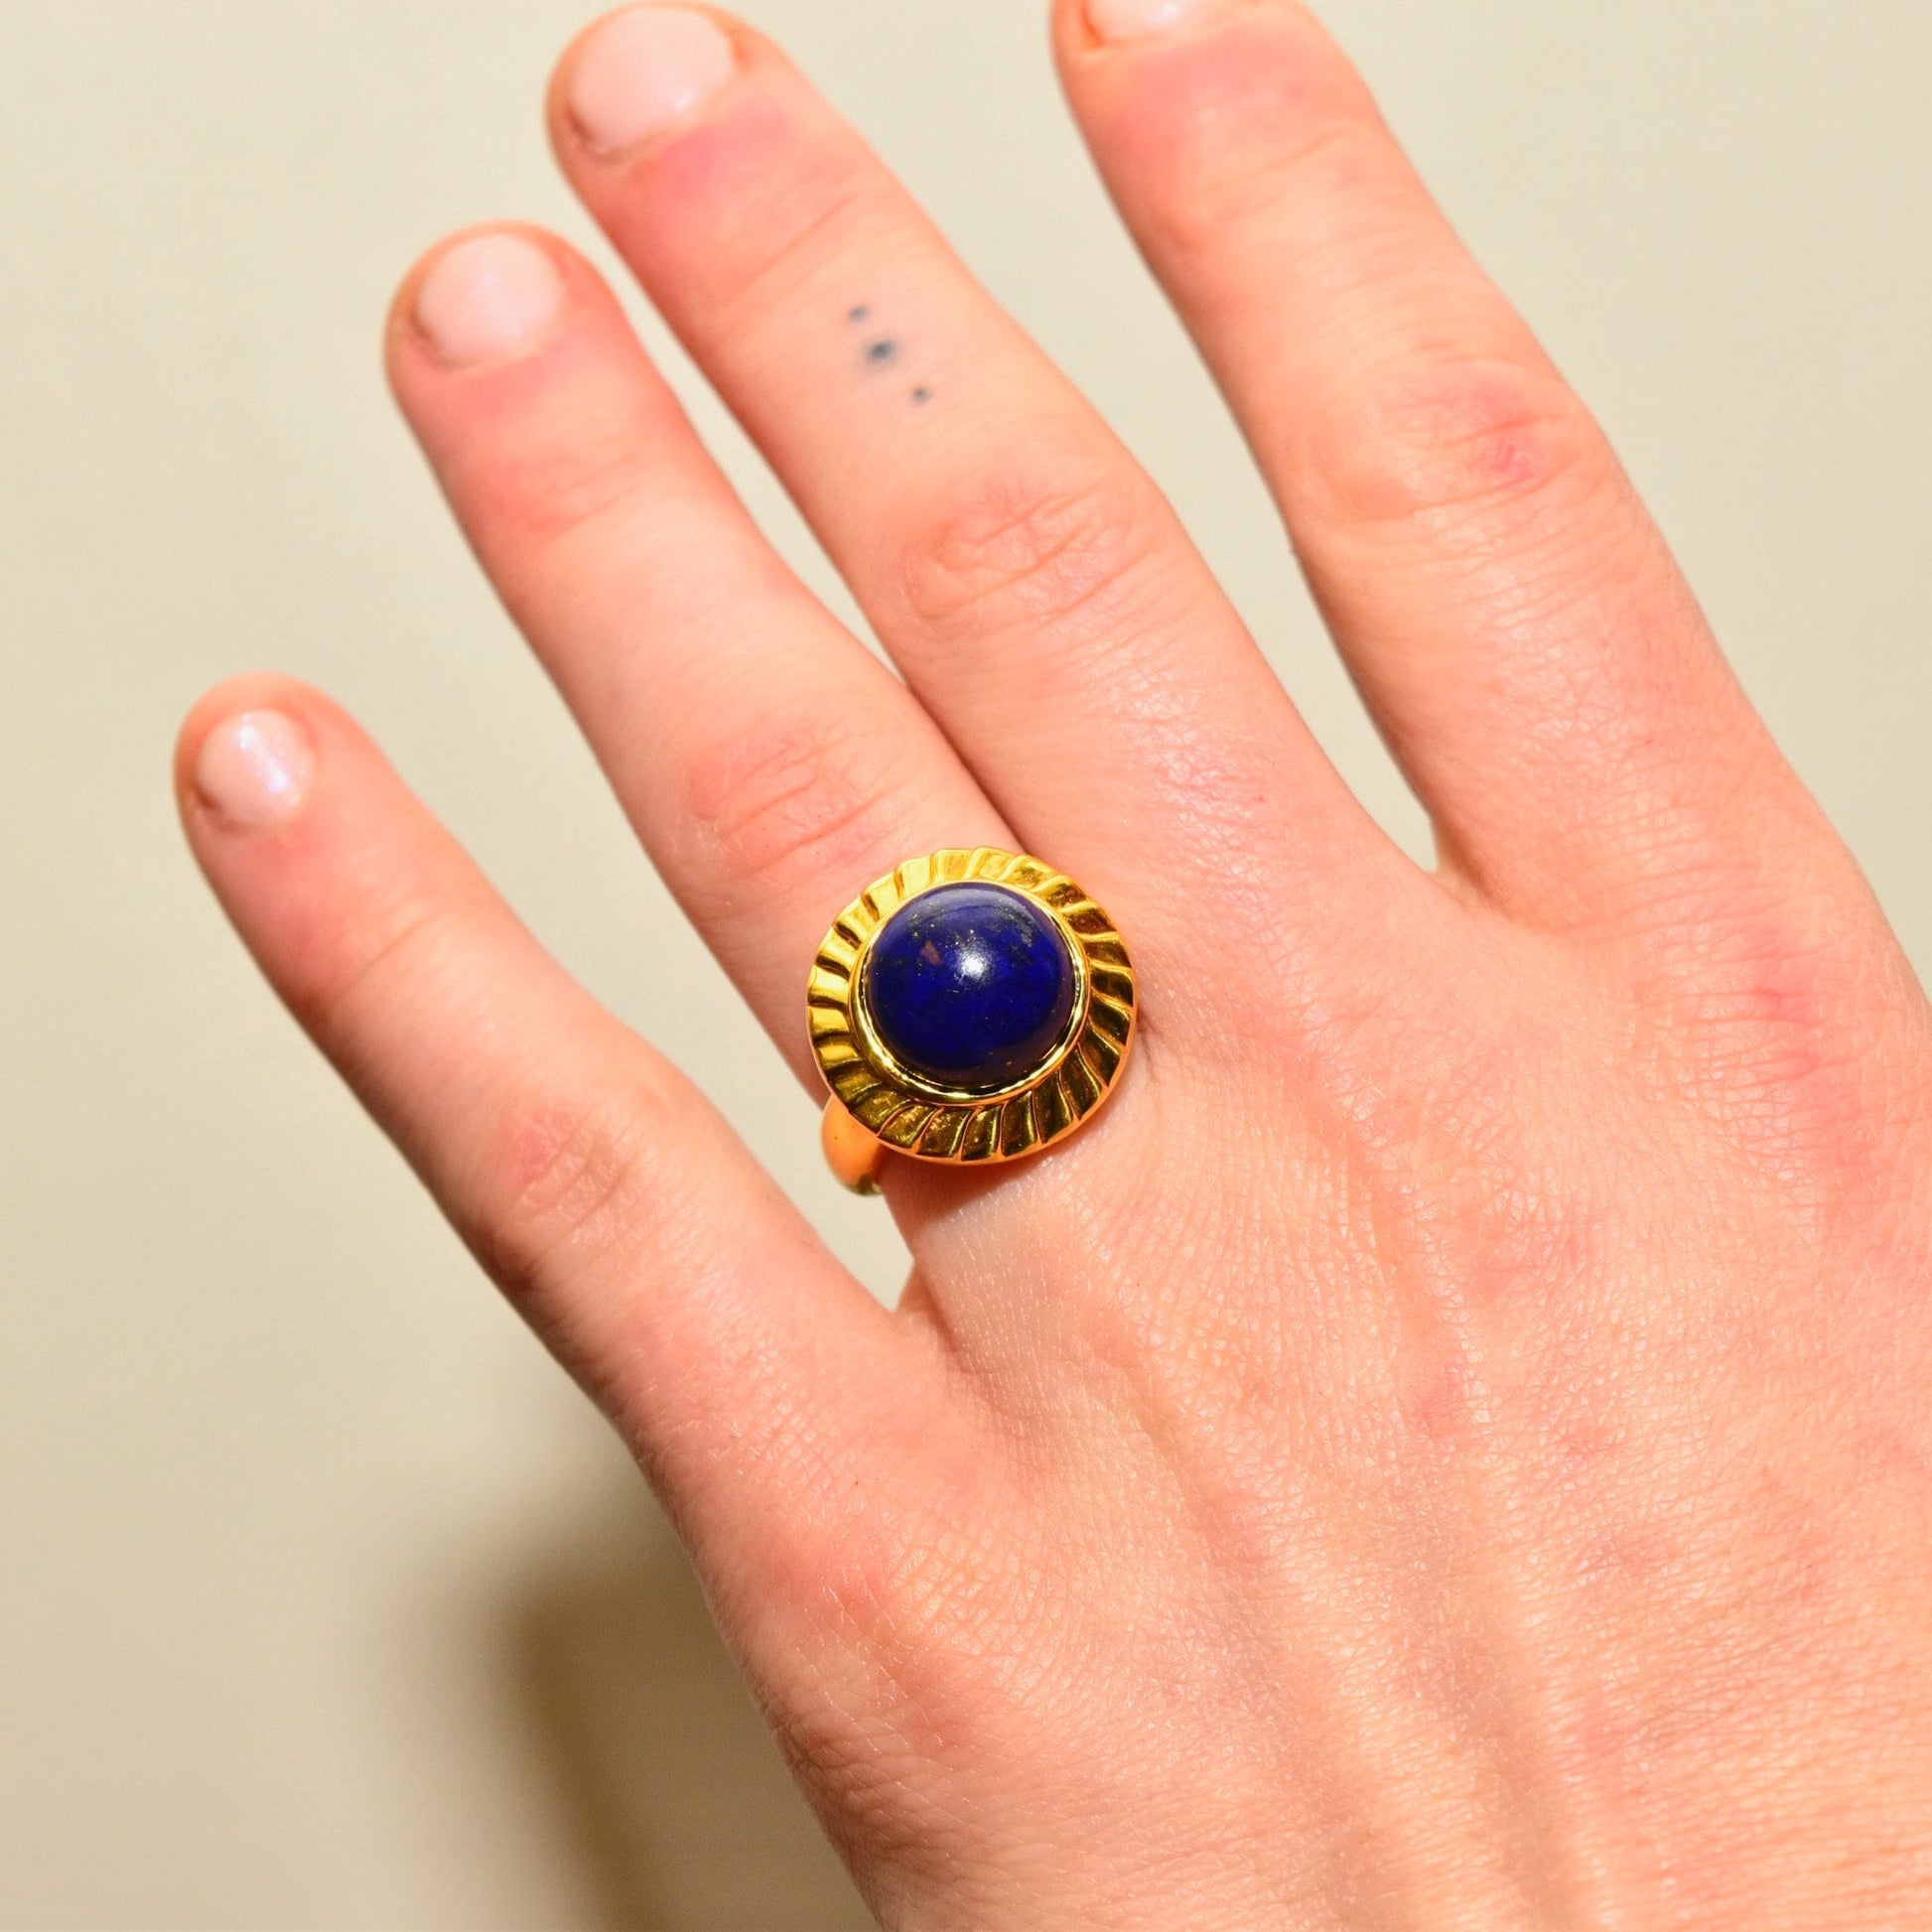 14K yellow gold lapis lazuli cabochon cocktail ring on hand, featuring a round cobalt blue gemstone solitaire, size 7 1/2 US.